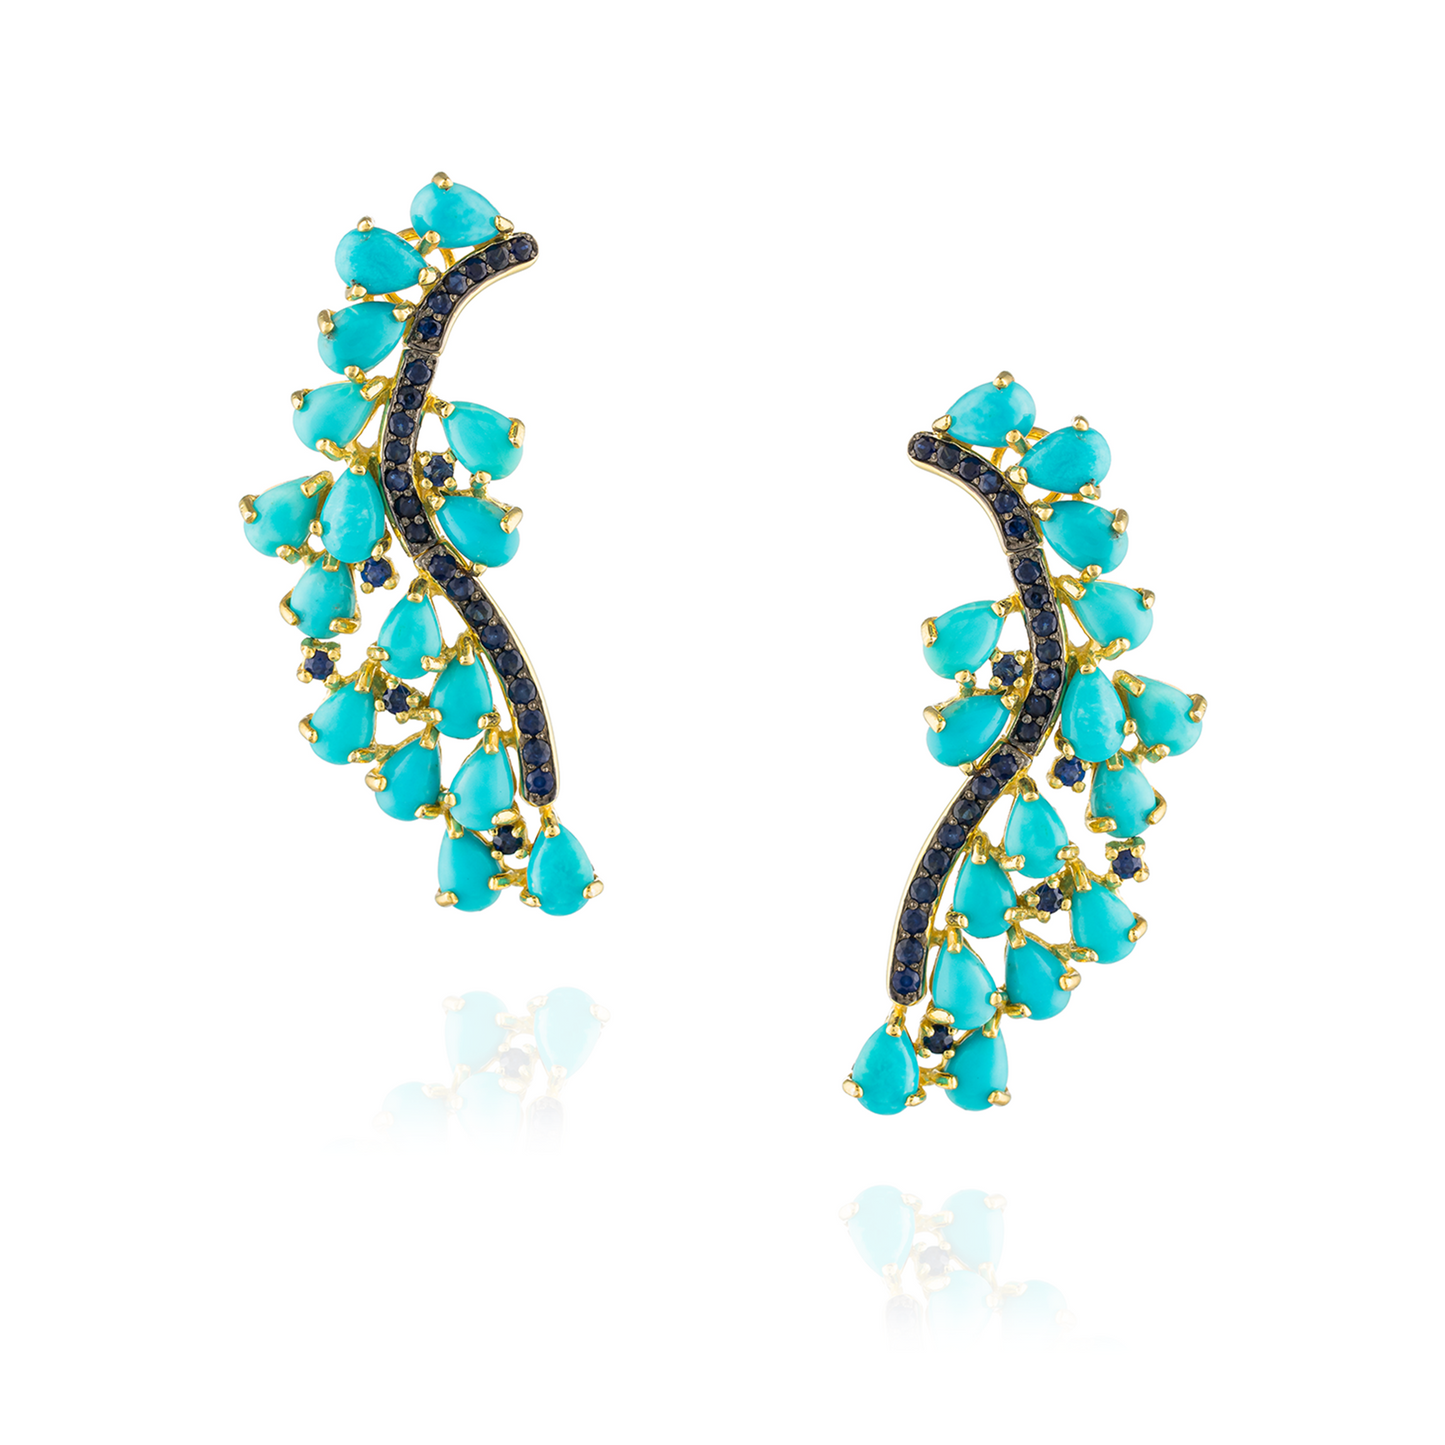 Floret 925 Silver Earrings Yellow Gold Plated with Turquoise Cabouchon and Blue Sapphires